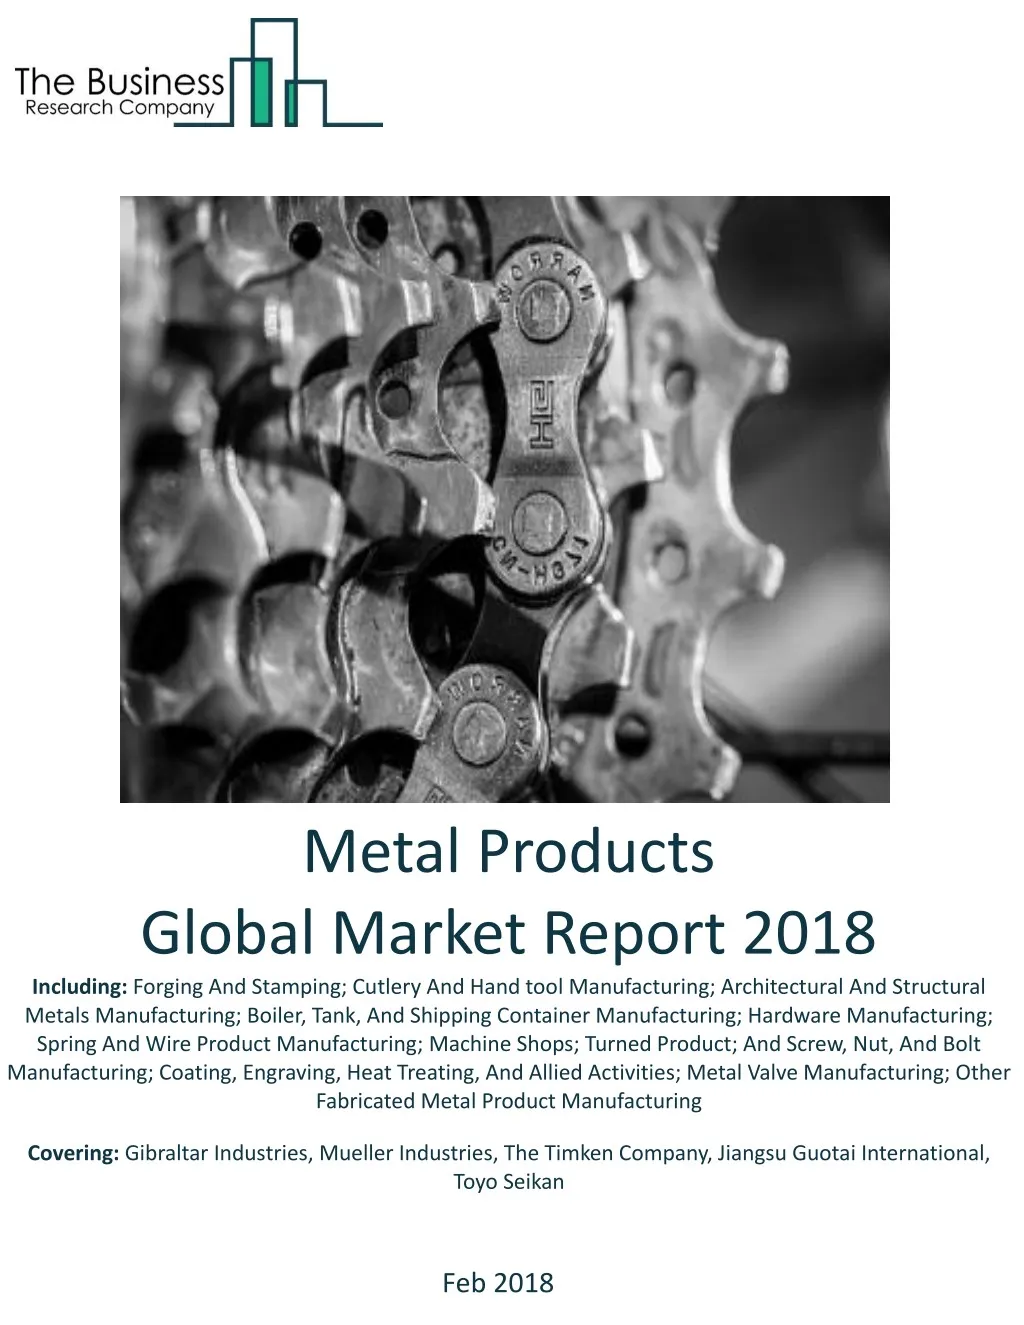 metal products global market report 2018